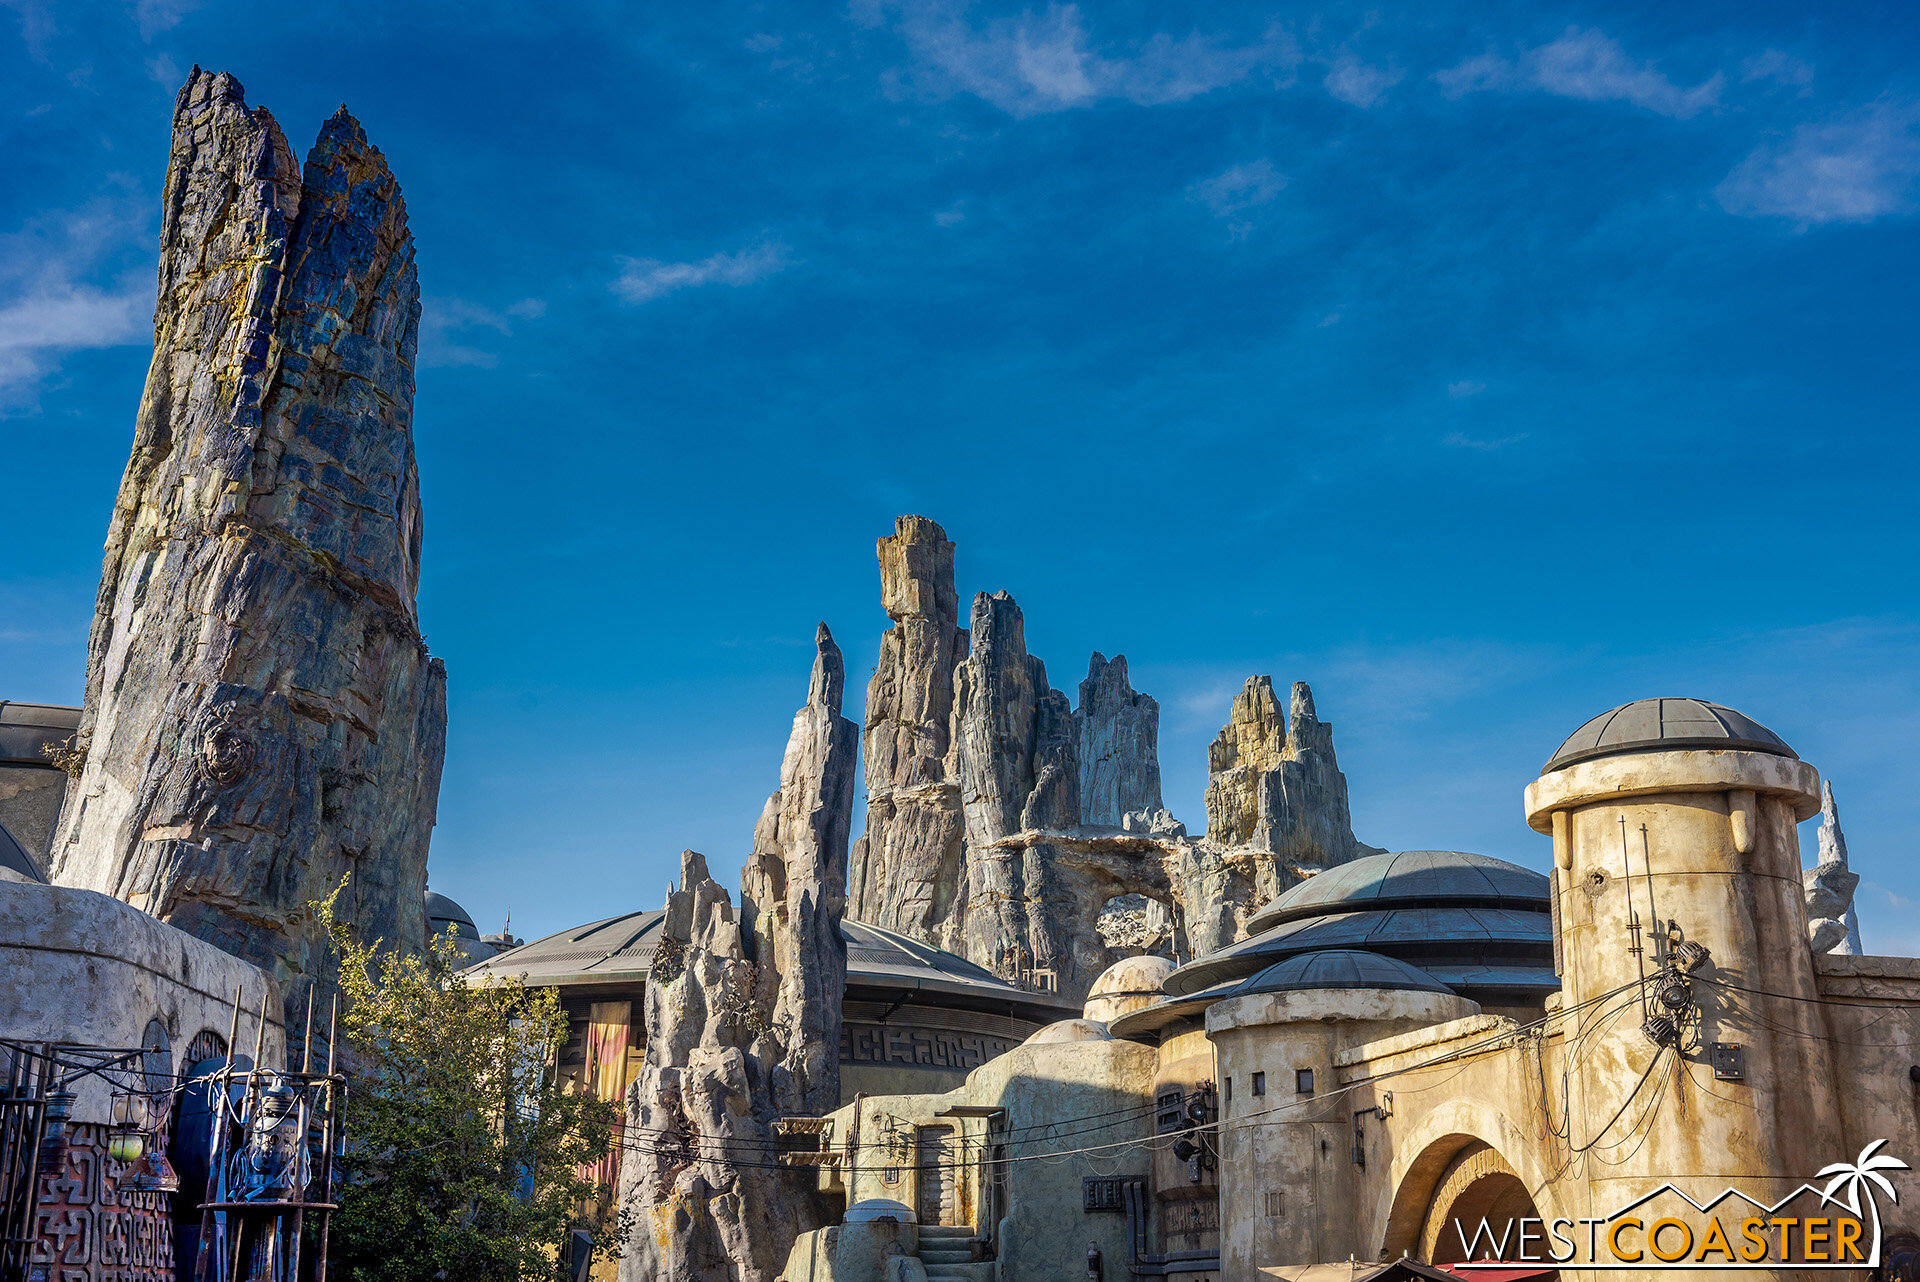  Those spires are oh so majestic! 